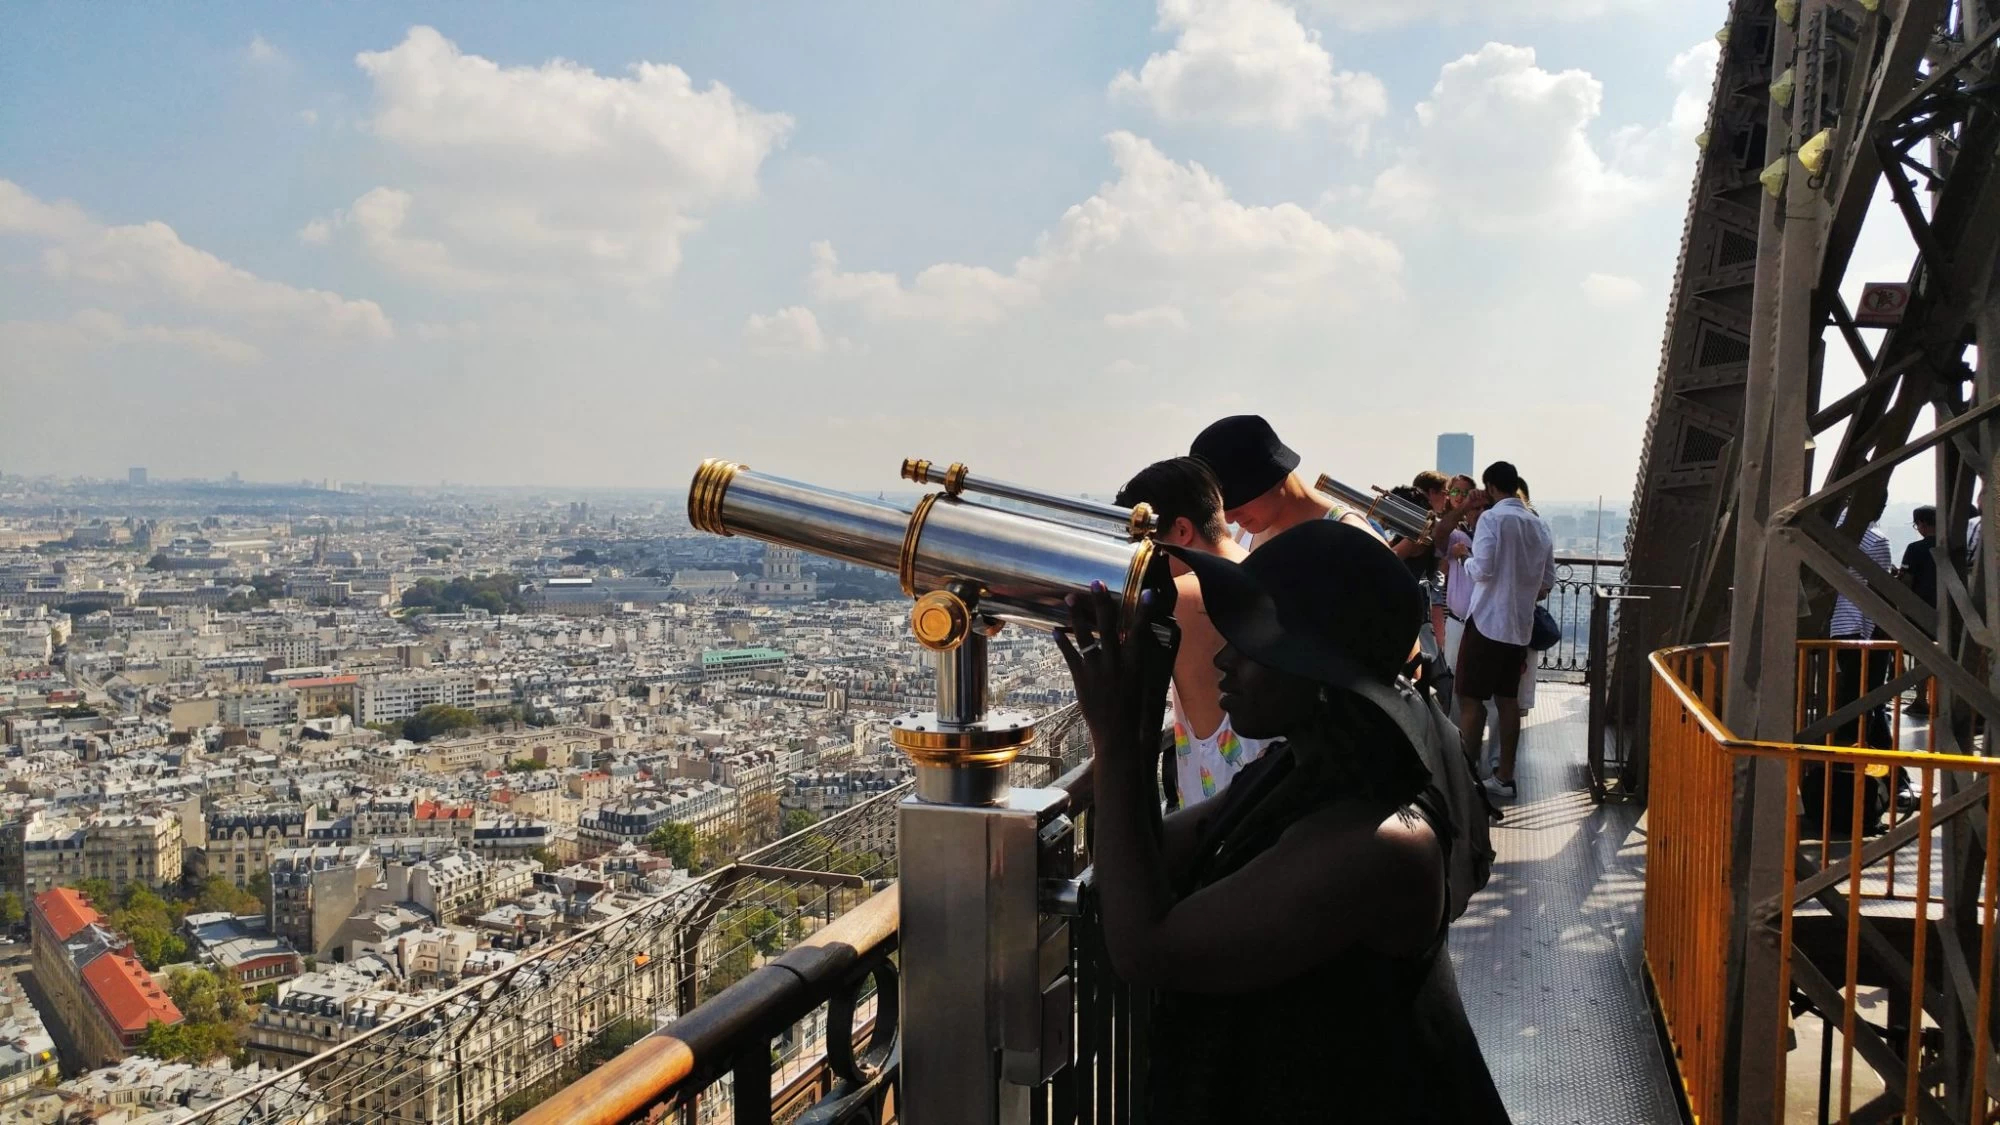 Shylo looking at the view from the top of the Eiffel tower in Paris